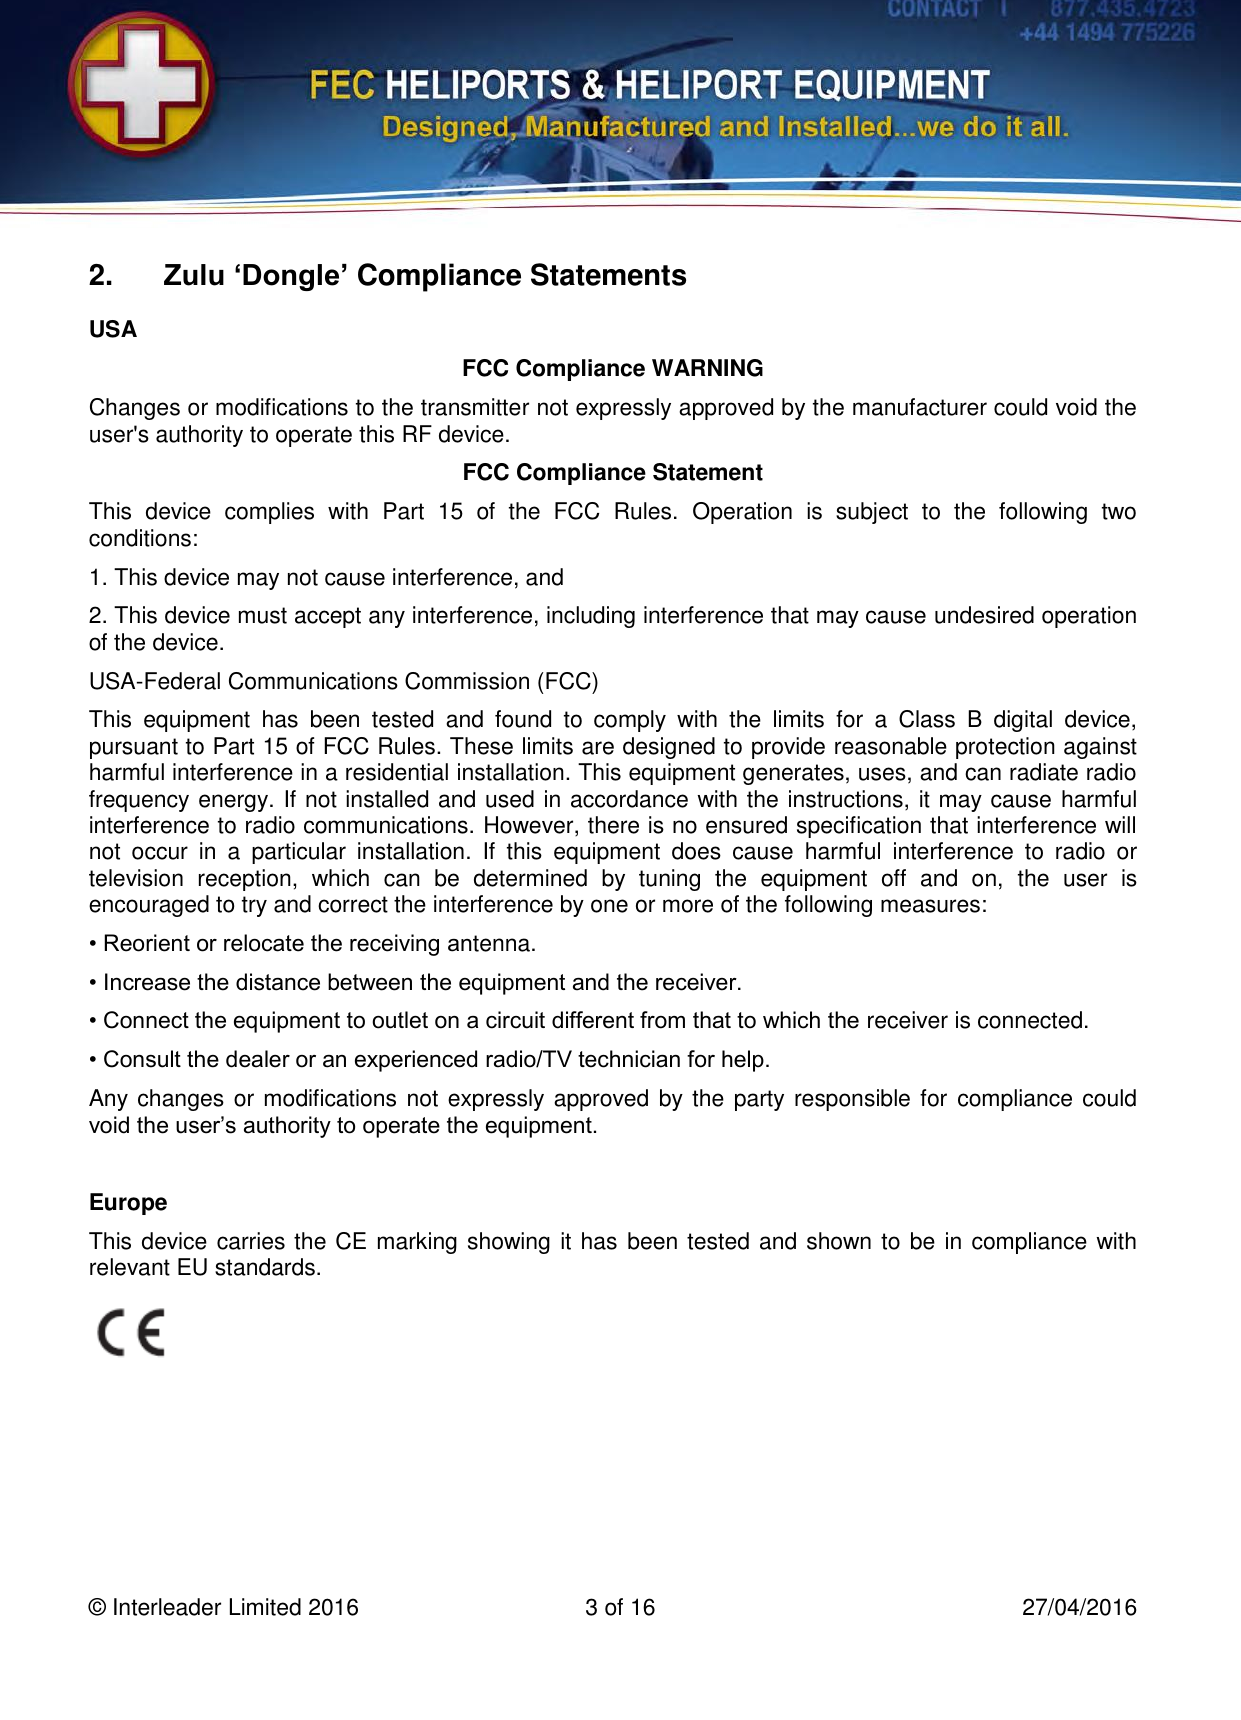    © Interleader Limited 2016  3 of 16  27/04/2016  2. Zulu ‘Dongle’ Compliance Statements USA FCC Compliance WARNING Changes or modifications to the transmitter not expressly approved by the manufacturer could void the user&apos;s authority to operate this RF device. FCC Compliance Statement This  device  complies  with  Part  15  of  the  FCC  Rules.  Operation  is  subject  to  the  following  two conditions: 1. This device may not cause interference, and 2. This device must accept any interference, including interference that may cause undesired operation of the device. USA-Federal Communications Commission (FCC) This  equipment  has  been  tested  and  found  to  comply  with  the  limits  for  a  Class  B  digital  device, pursuant to Part 15 of FCC Rules. These limits are designed to provide reasonable protection against harmful interference in a residential installation. This equipment generates, uses, and can radiate radio frequency energy. If not installed and used in accordance with the instructions, it may cause harmful interference to radio communications. However, there is no ensured specification that interference will not  occur  in  a  particular  installation.  If  this  equipment  does  cause  harmful  interference  to  radio  or television  reception,  which  can  be  determined  by  tuning  the  equipment  off  and  on,  the  user  is encouraged to try and correct the interference by one or more of the following measures: • Reorient or relocate the receiving antenna. • Increase the distance between the equipment and the receiver. • Connect the equipment to outlet on a circuit different from that to which the receiver is connected. • Consult the dealer or an experienced radio/TV technician for help. Any changes or modifications not expressly approved by the party responsible for  compliance could void the user’s authority to operate the equipment.  Europe This device carries the CE marking showing it has been tested and shown to be in compliance with relevant EU standards.    